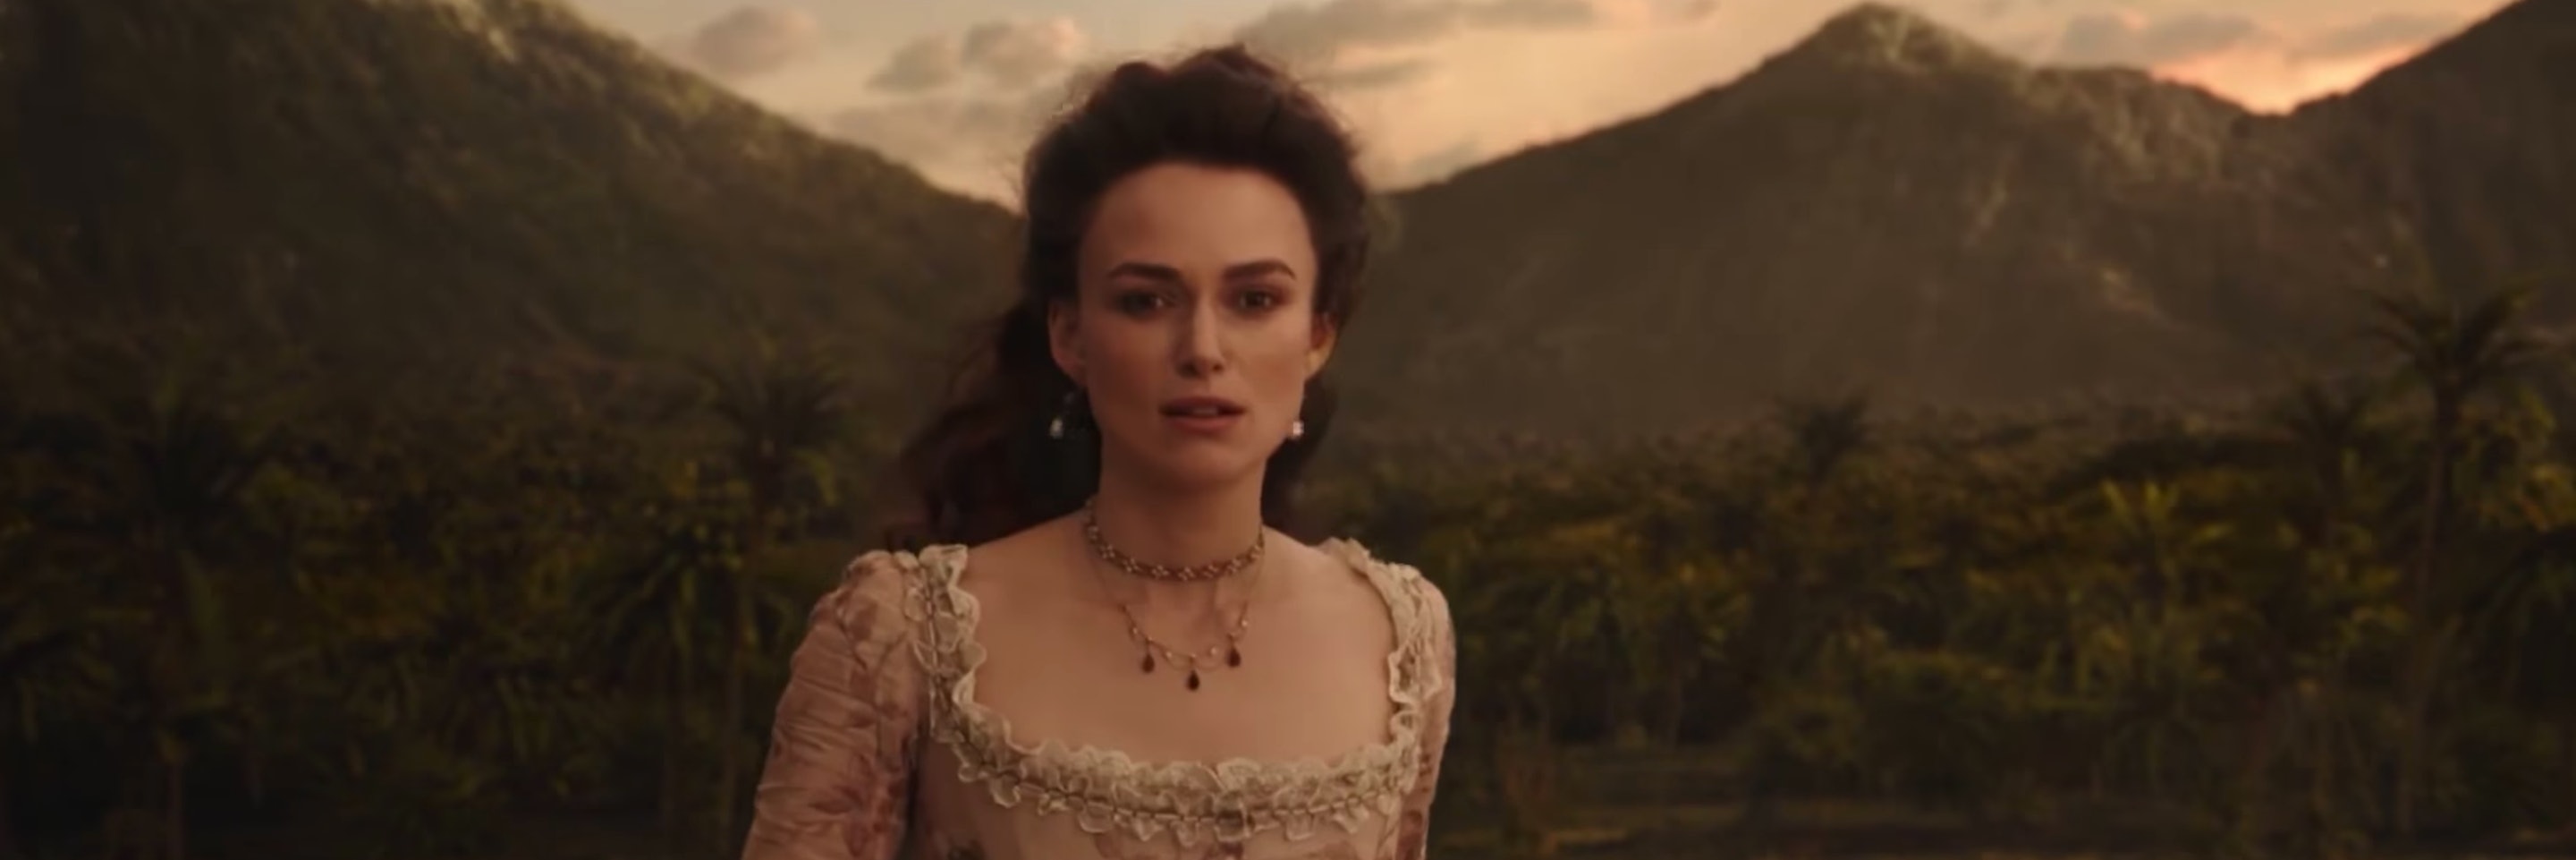 Keira Knightley Returns To The Pirates Of The Caribbean